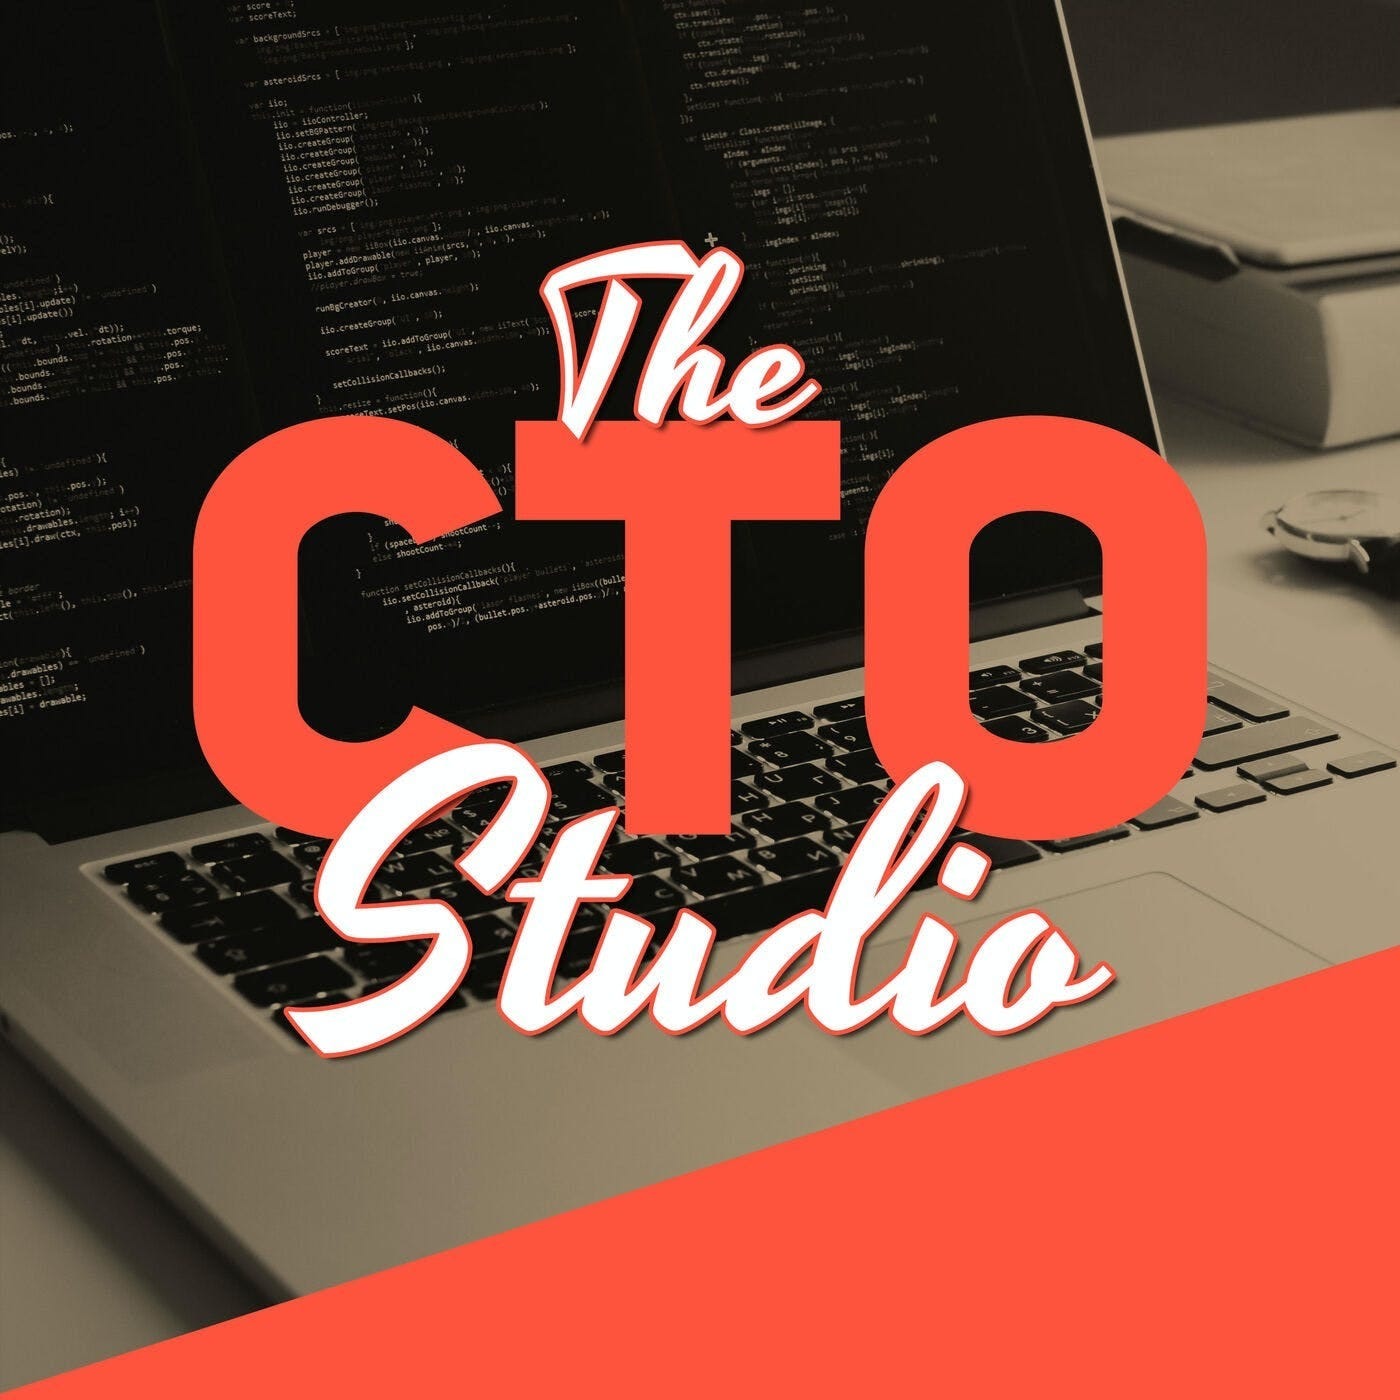 Ep. 70 The Case For Infrastructure As Code Part 1